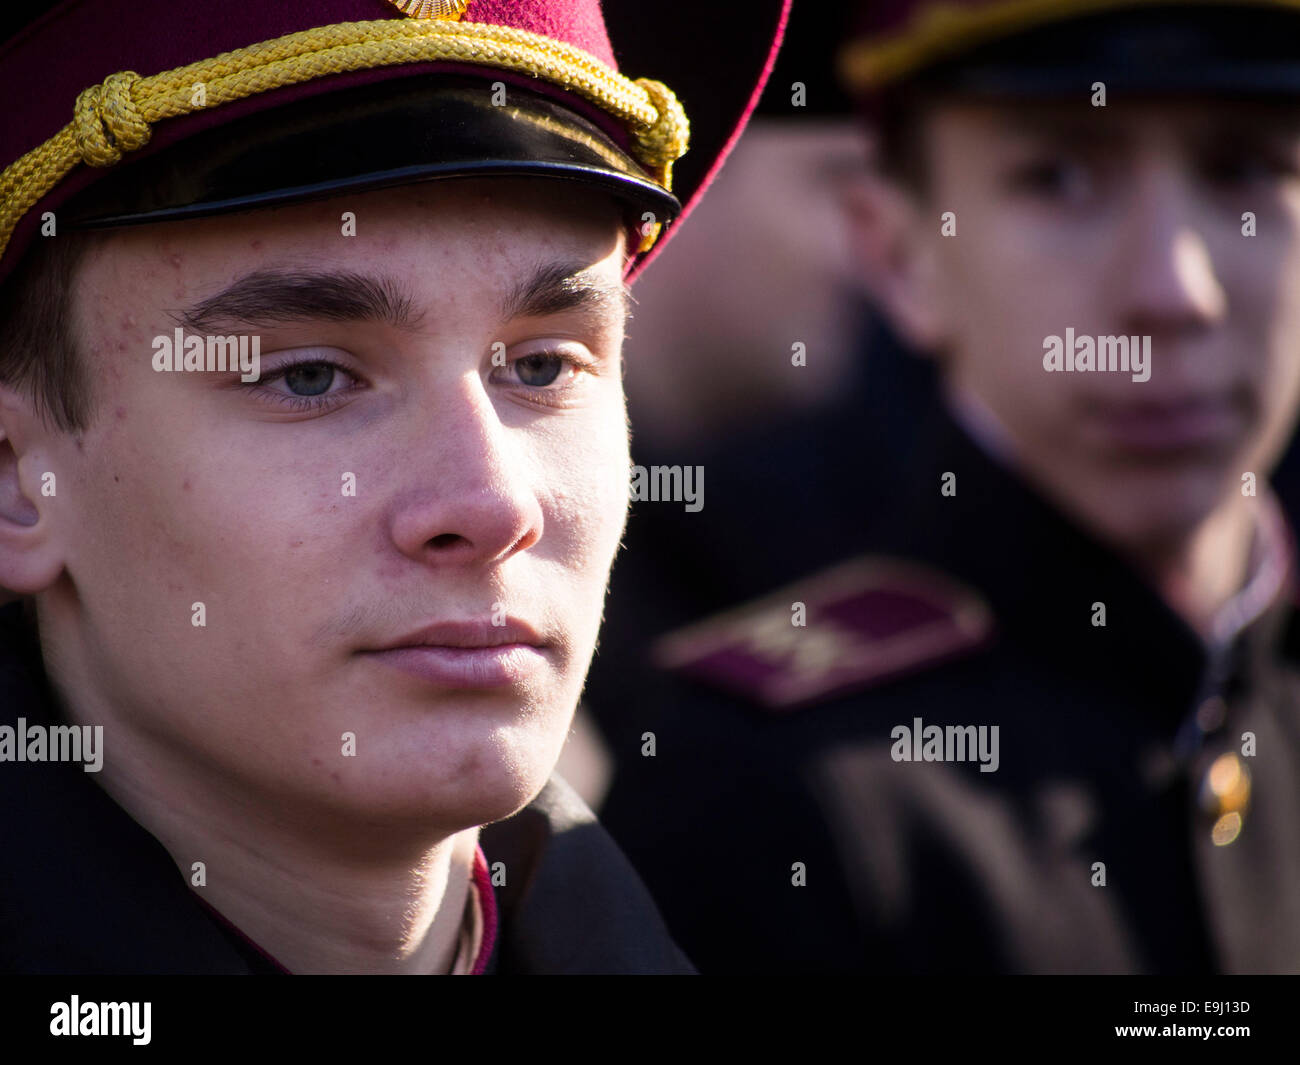 Kiev, Ukraine. 28th October, 2014. Cadet honor guard.  Kiev cadets and schoolchildren at Babi Yar, held a rally on the 70th anniversary of Ukraine's liberation. Babii Yar tragedy known worldwide. During the Second World War, the Nazis executed here 100 thousand inhabitants of Kiev, mainly Jews. Celebration of Ukraine's liberation from the Nazis passed under the Russian occupation of the Crimea and Eastern Ukraine. Credit:  Igor Golovnov/Alamy Live News Stock Photo